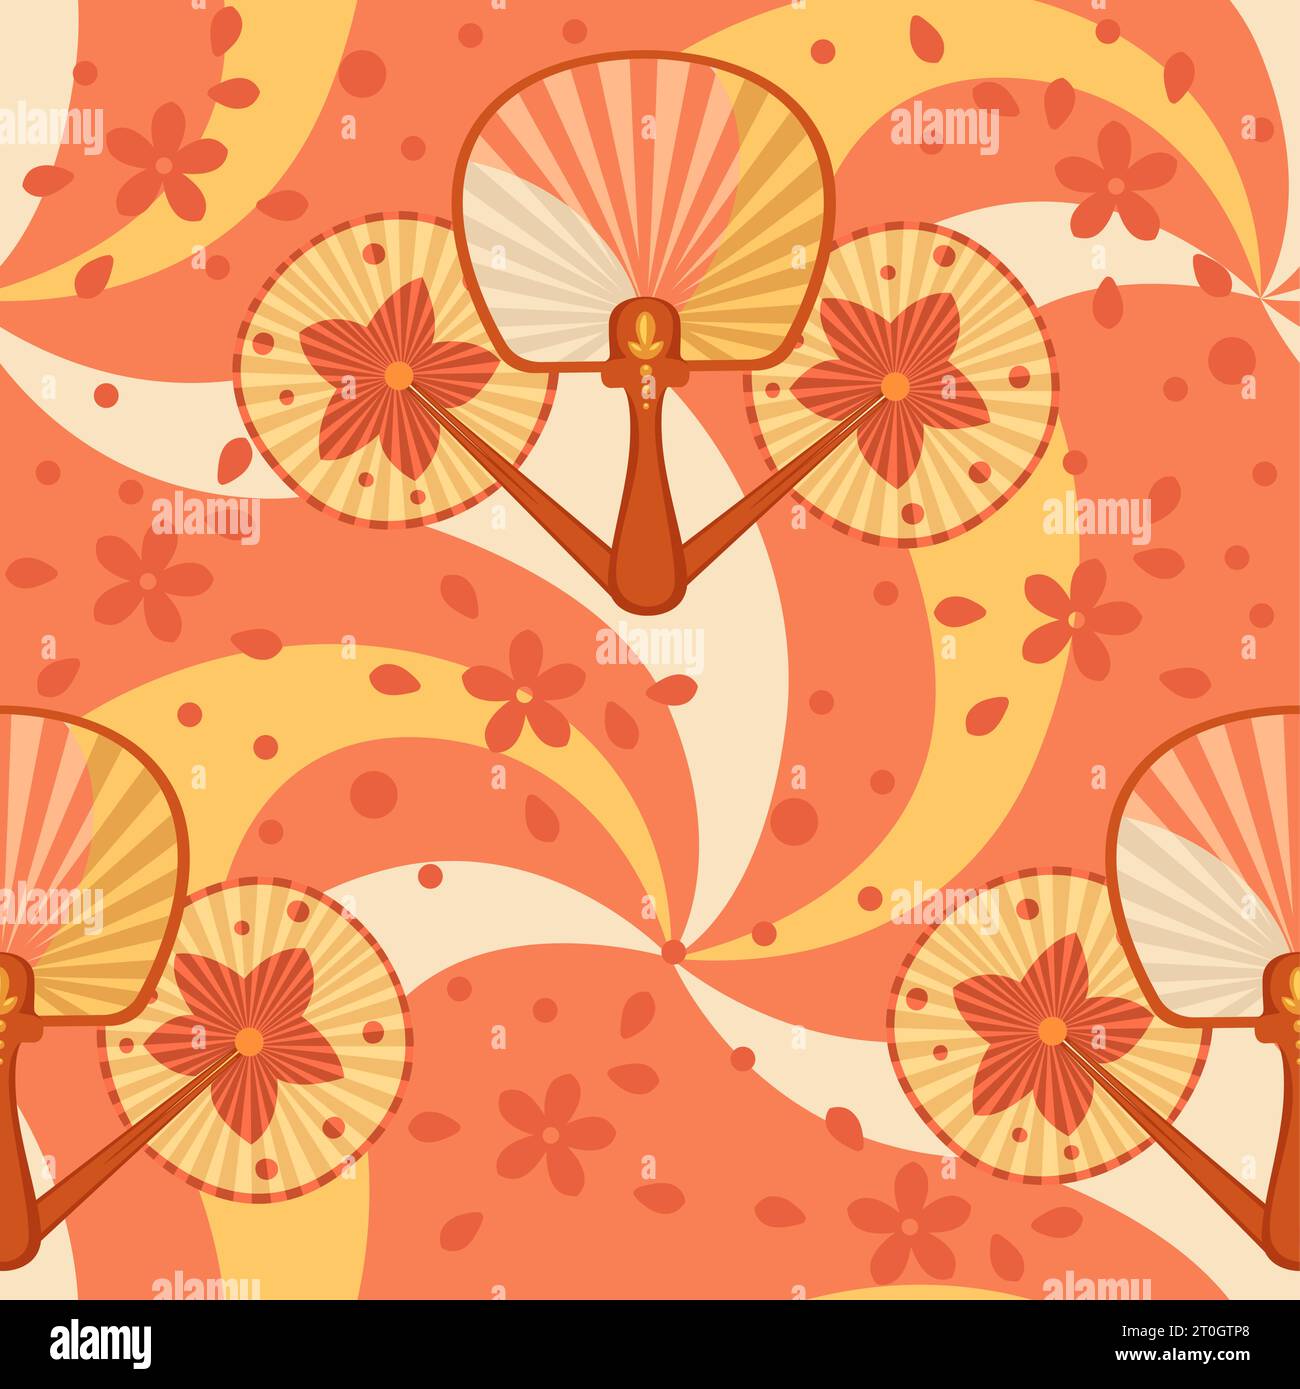 Seamless pattern classic asian style hand fan vector illustration Stock Vector